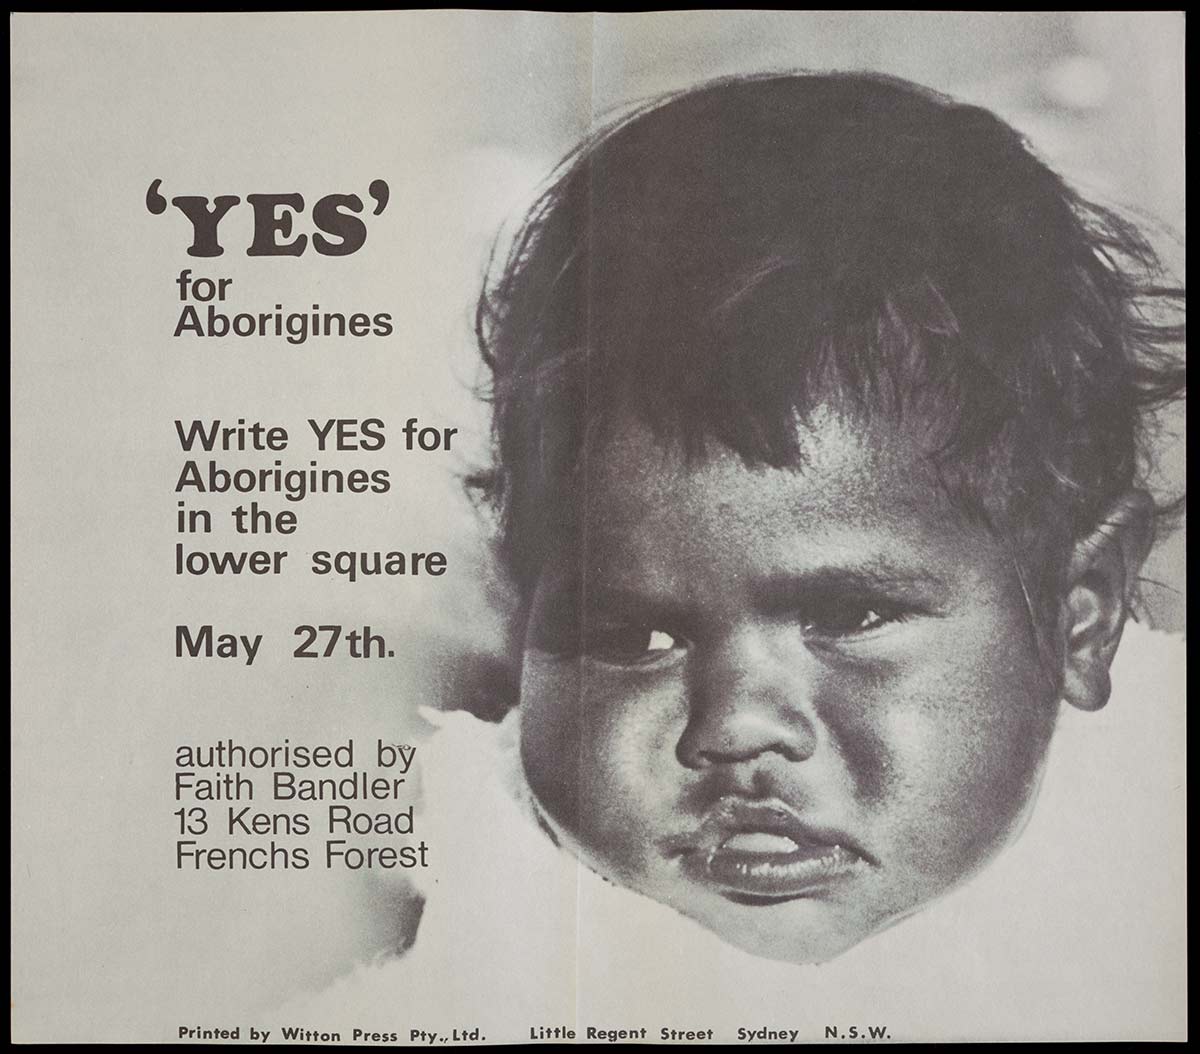 A black and white poster for the Yes campaign for the Federal Referendum on 27 May, 1967. It depicts a portrait photograph of an Aboriginal baby identified as Janelle Marshall. The text, 'YES' / for / Aborigines / Write YES for / Aborigines / in the / lower square / May 27th. / authorised by / Faith Bandler / 13 Kens Road / Frenchs Forest', appears to the left of the portrait and the text ?Printed by Witton Press Pty., Ltd. Little Regent Street Sydney N.S.W.?, appears across the bottom edge.